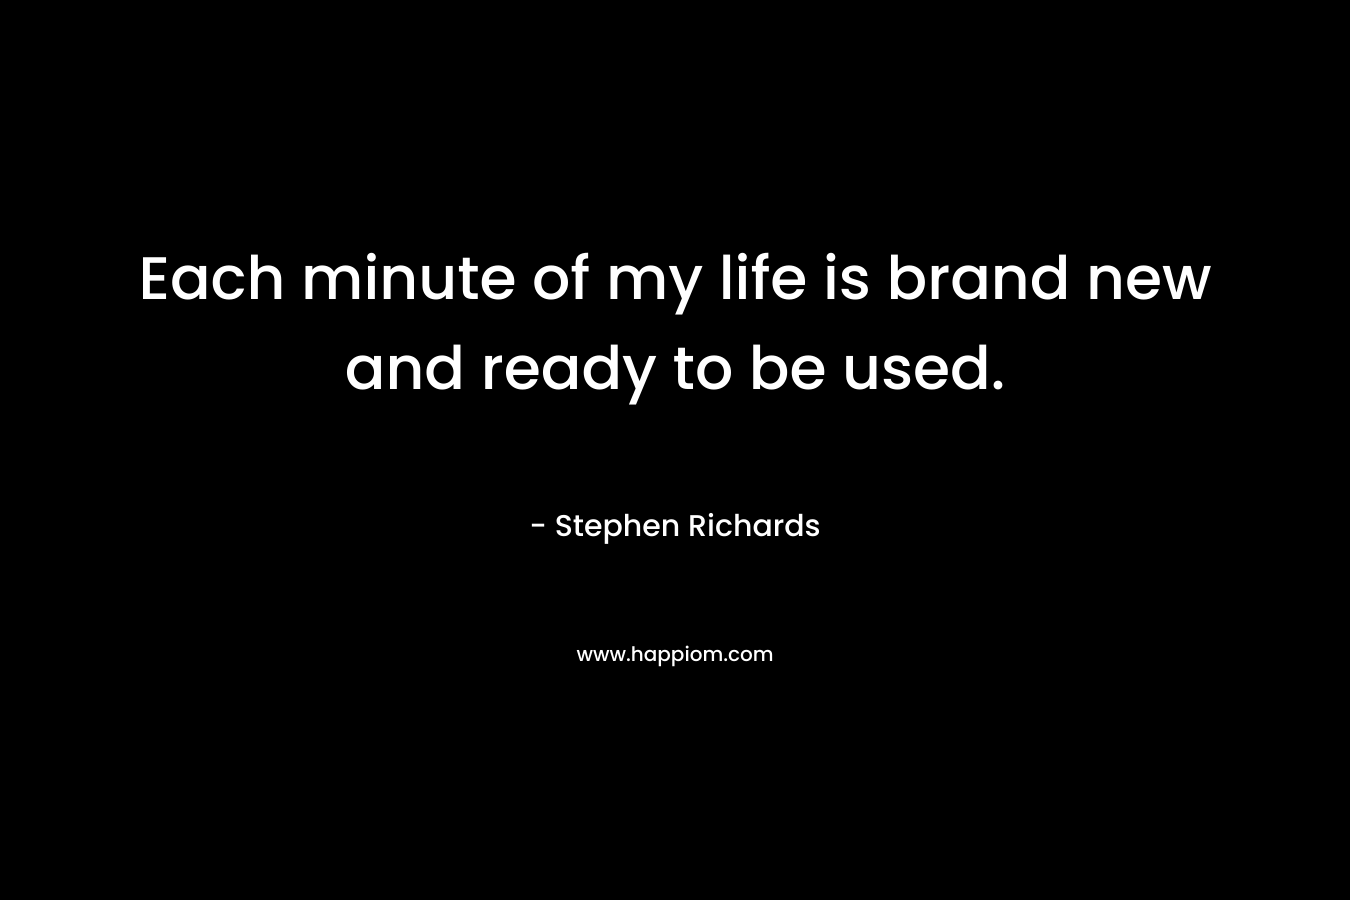 Each minute of my life is brand new and ready to be used.